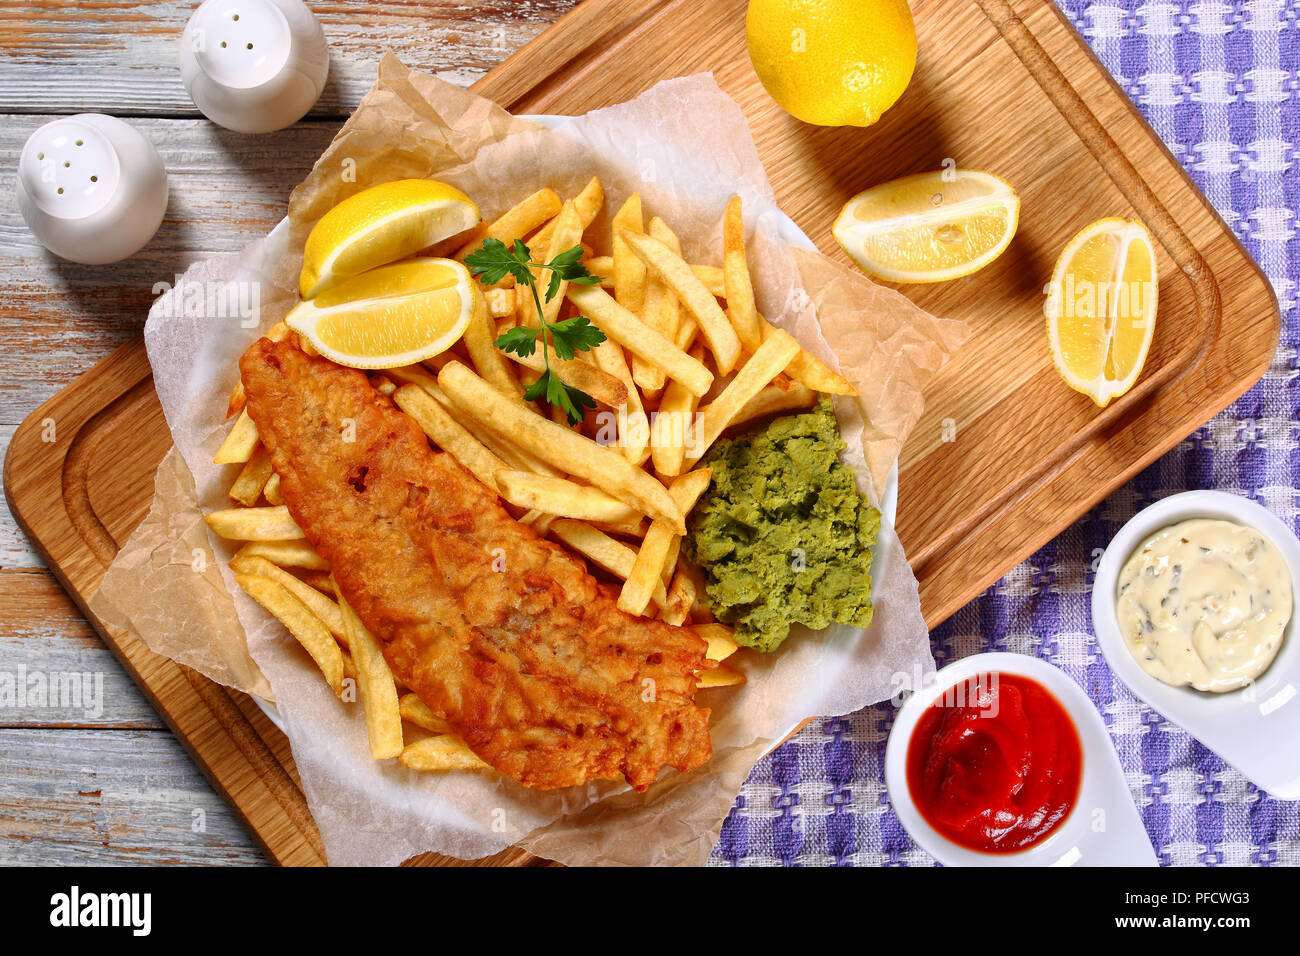 crispy fish and chips - fried cod, french fries, lemon slices, tartar sauce and mashed peas on plate on paper on old wooden table with rosemary in mor Stock Photo